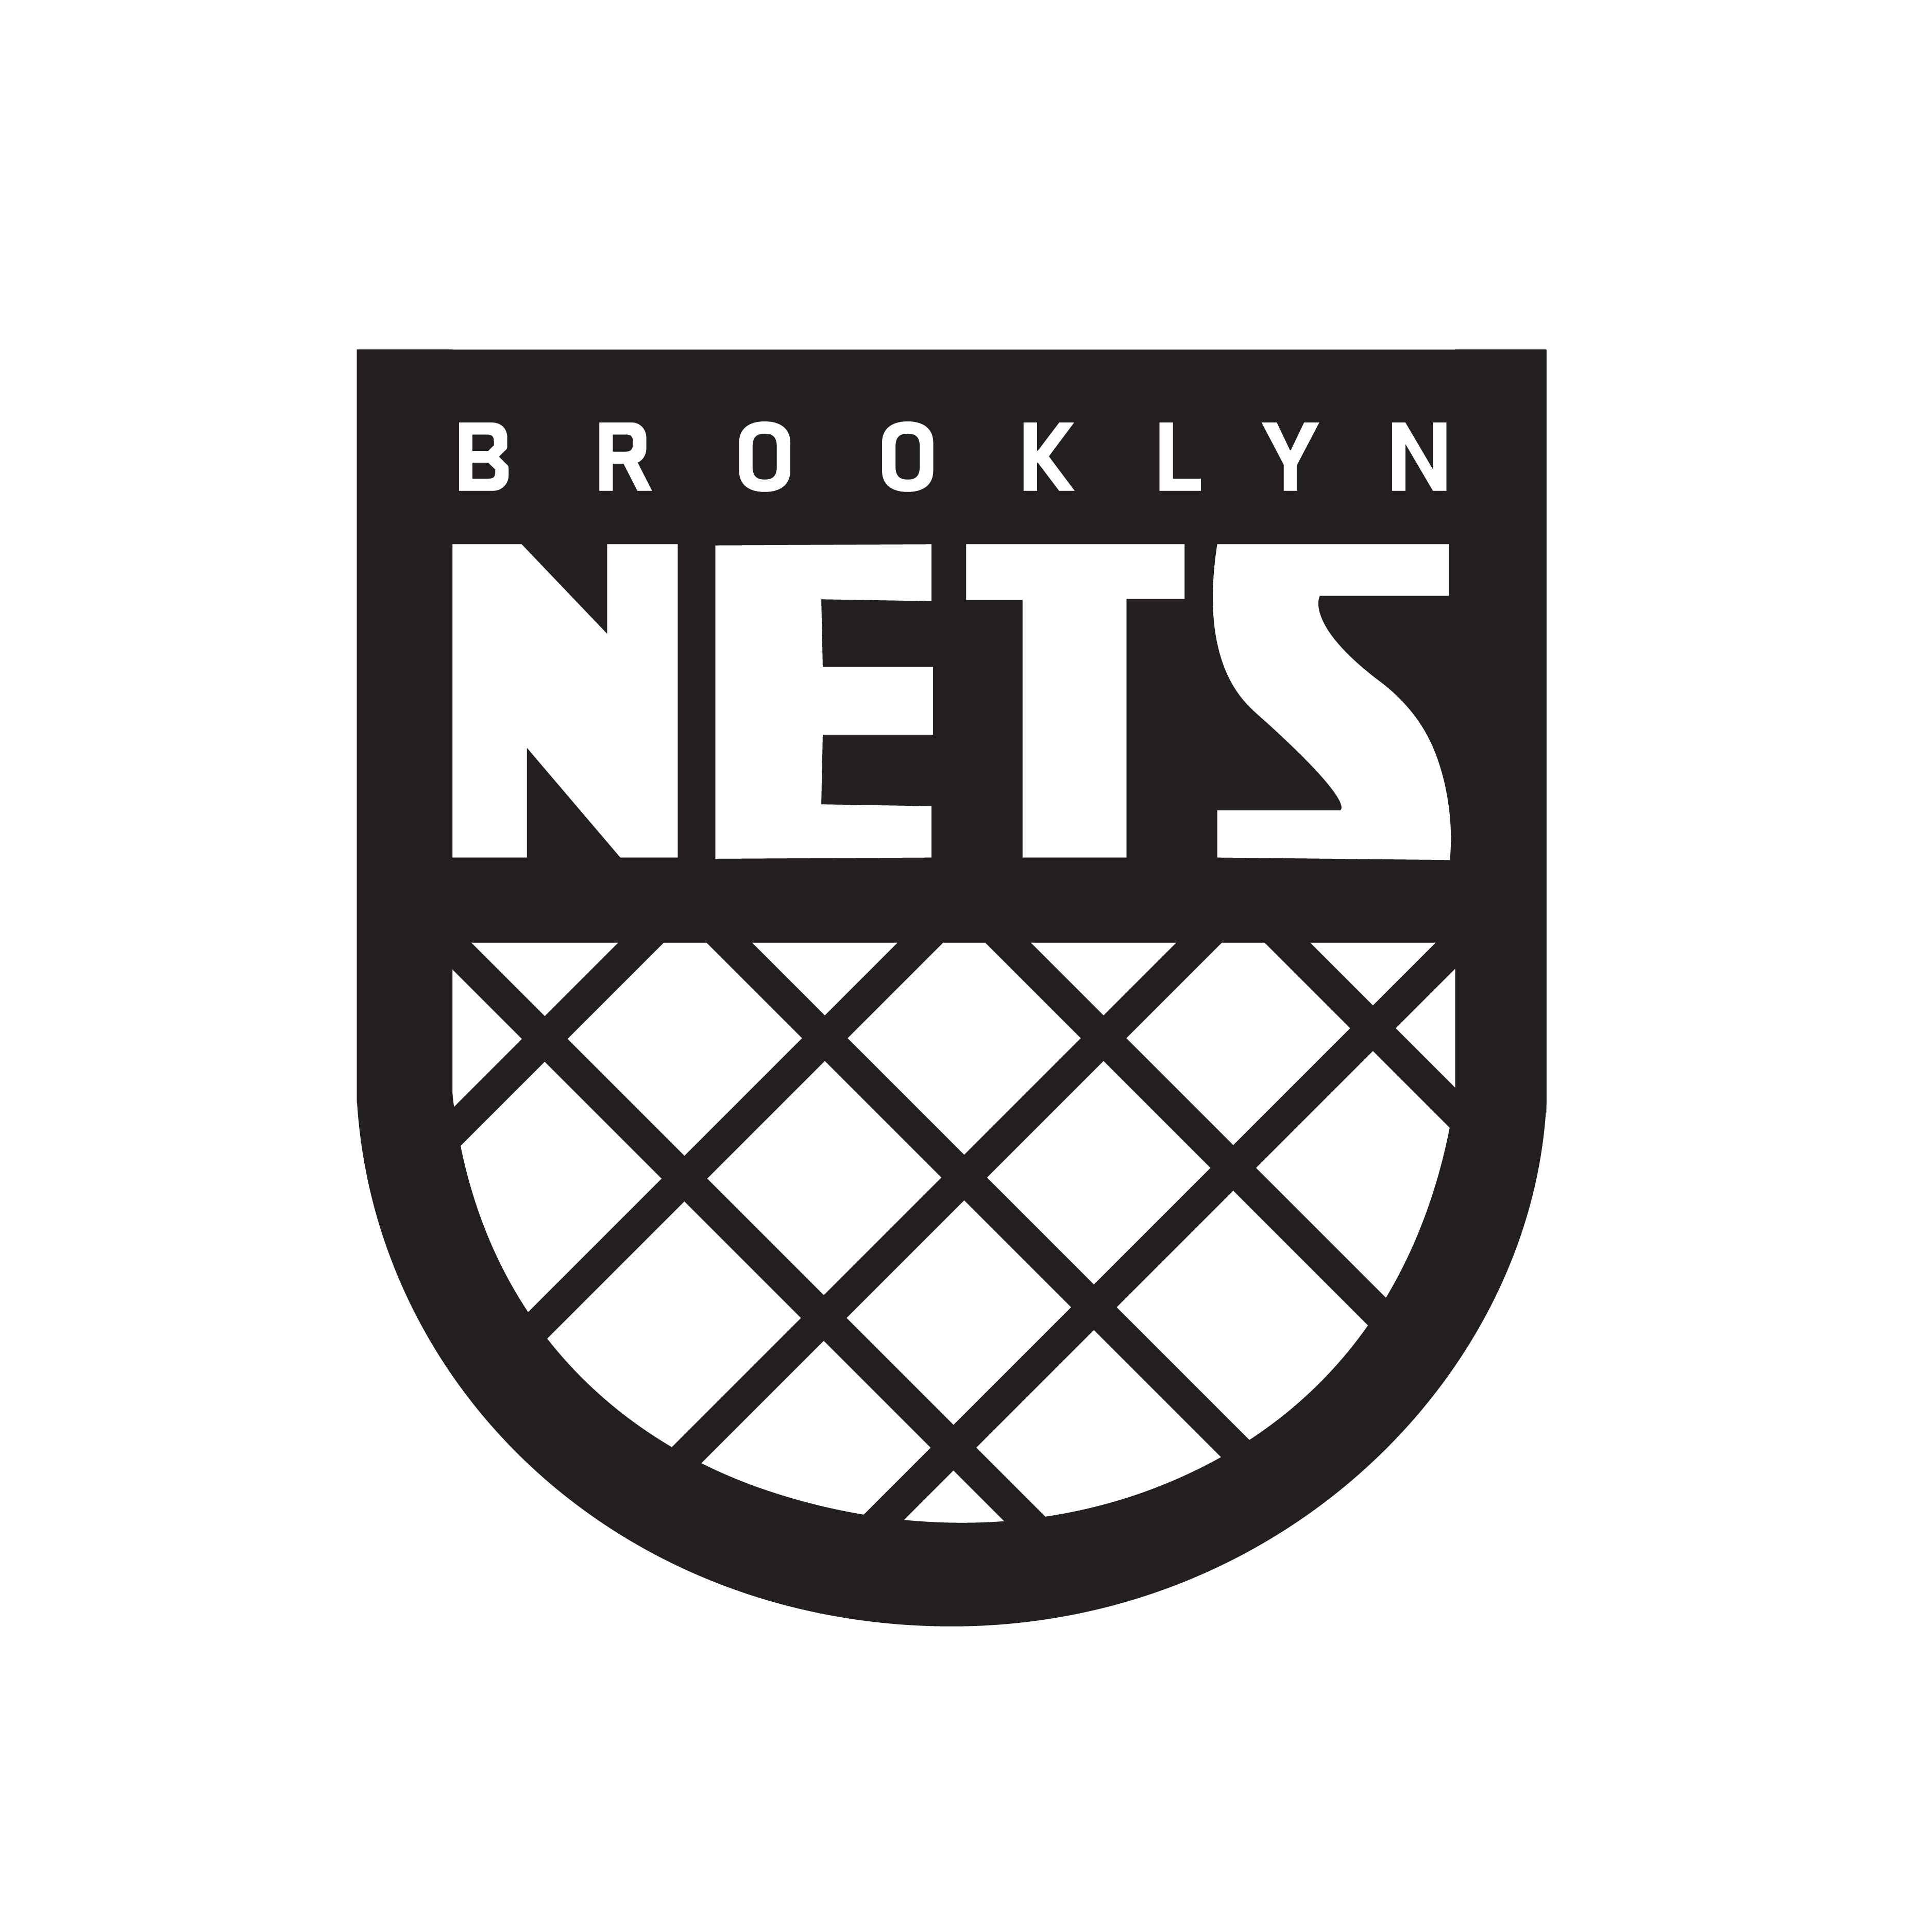 Brooklyn Nets logo design by logo designer Kenion Harvey Design for your inspiration and for the worlds largest logo competition